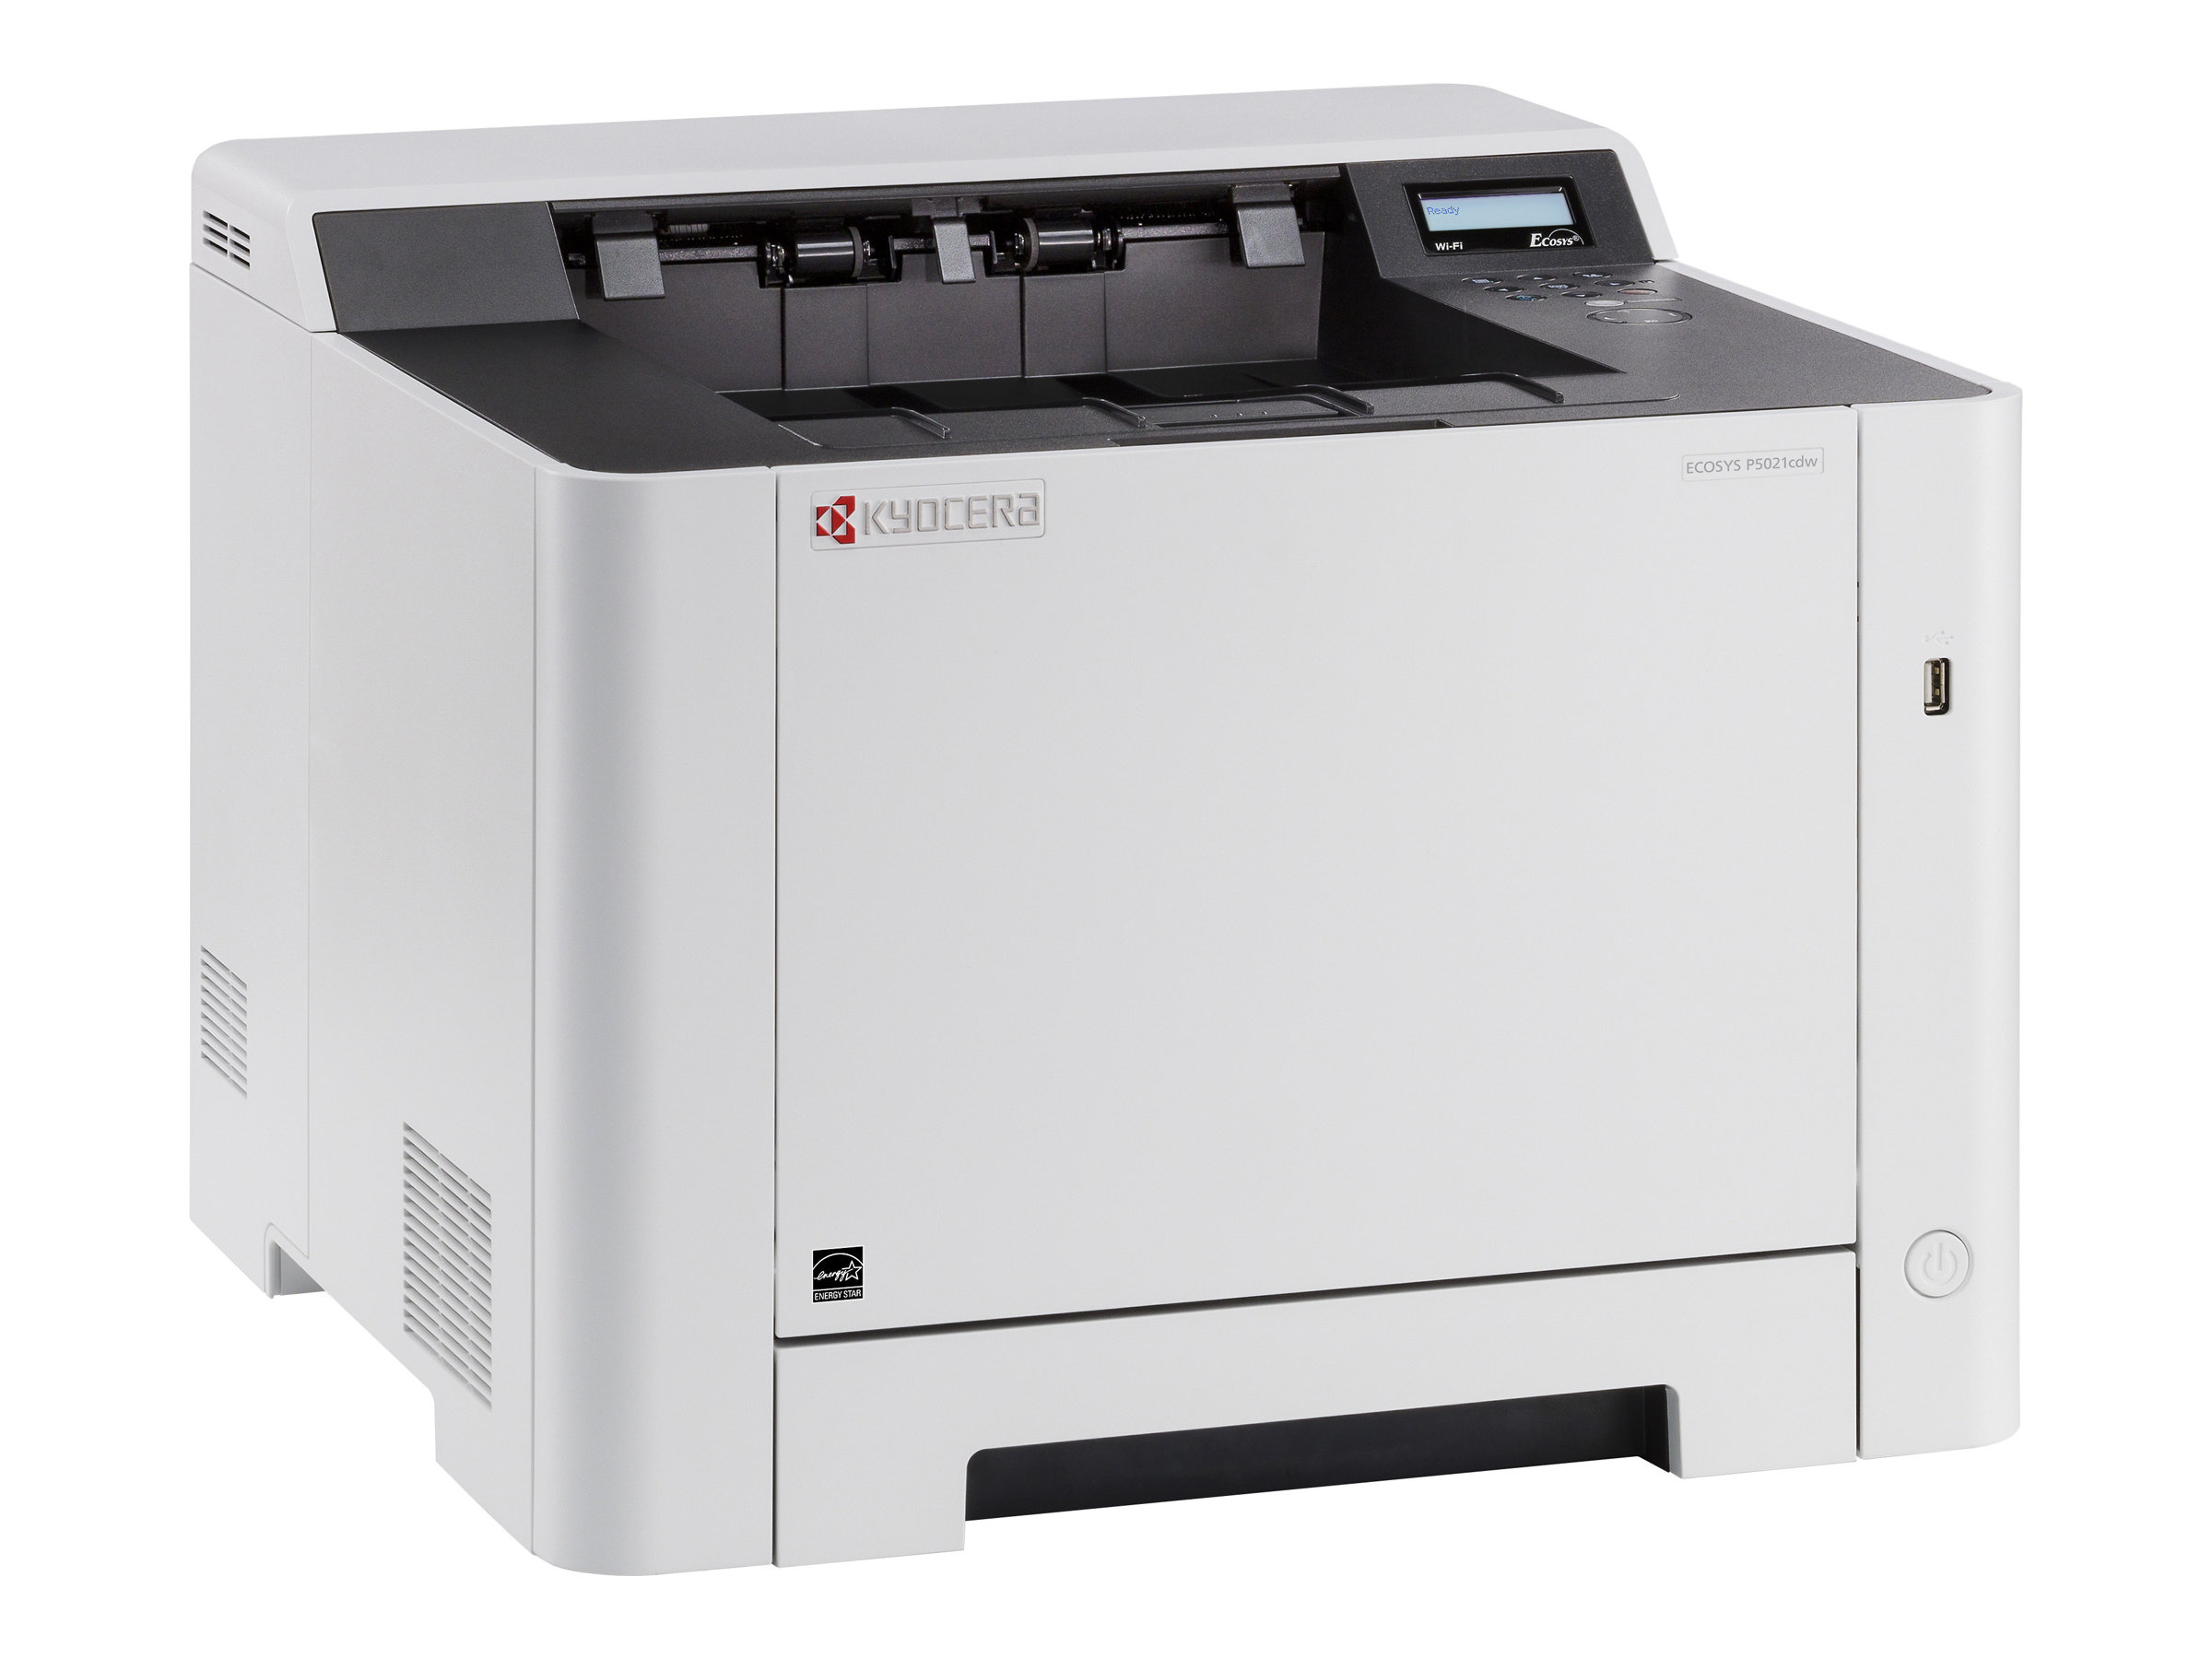 Kyocera ECOSYS P5021cdw - Printer - color - Duplex - laser - A4/Legal - 9600 x 600 dpi - up to 21 ppm (mono) / up to 21 ppm (color) - capacity: 300 sheets - USB 2.0, Gigabit LAN, USB host, Wi-Fi - image 4 of 4